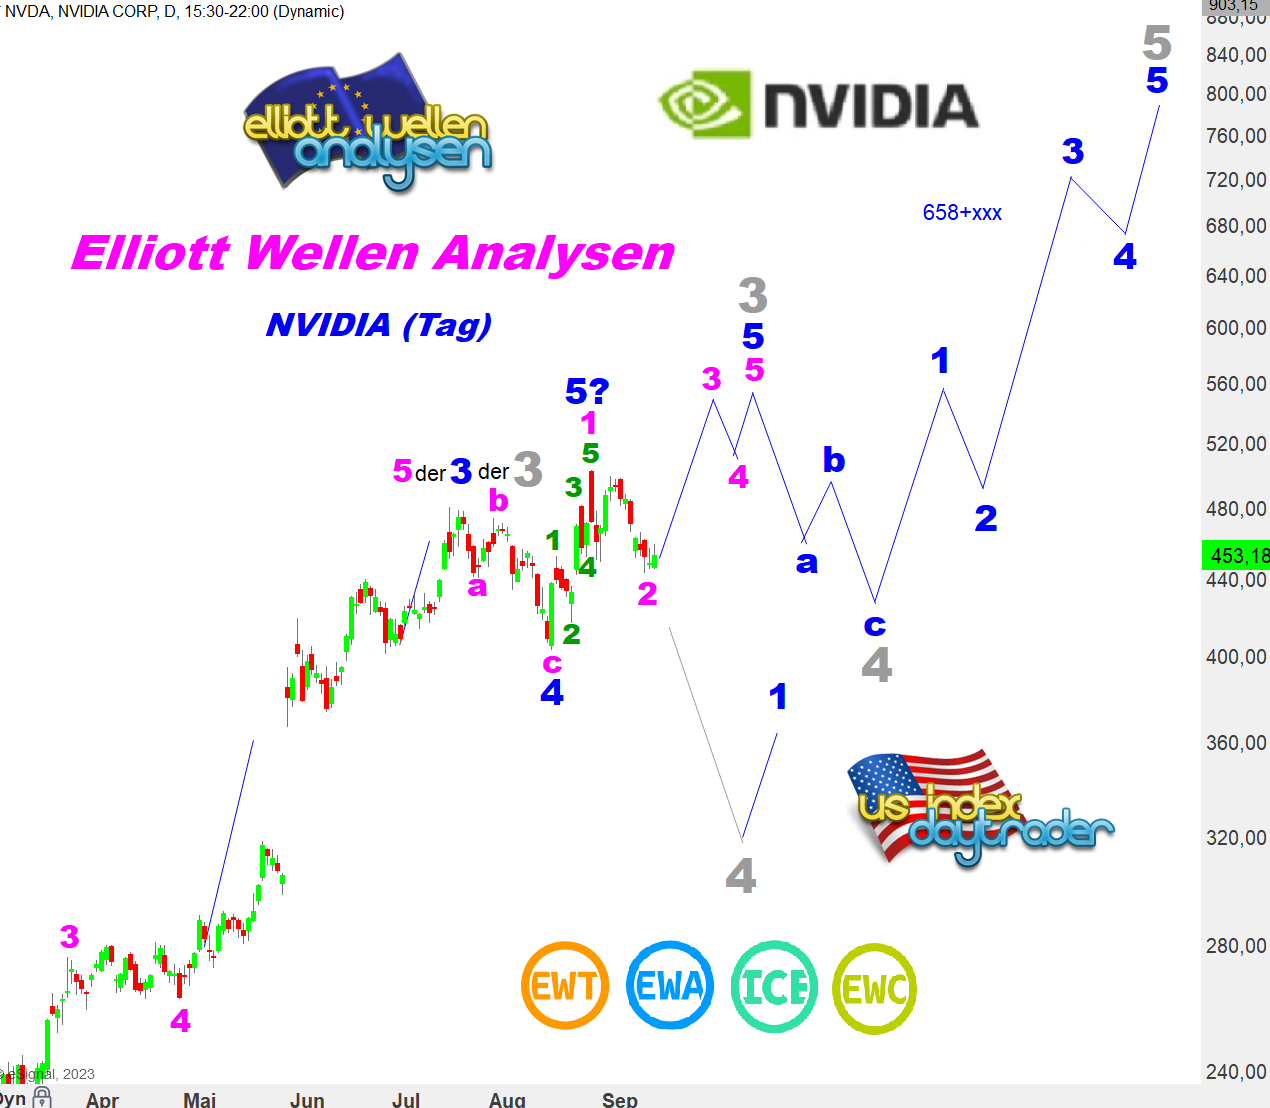 EW-Analyse-NVIDIA-Anspruchsvolles-Muster-André-Tiedje-stock3.com-1